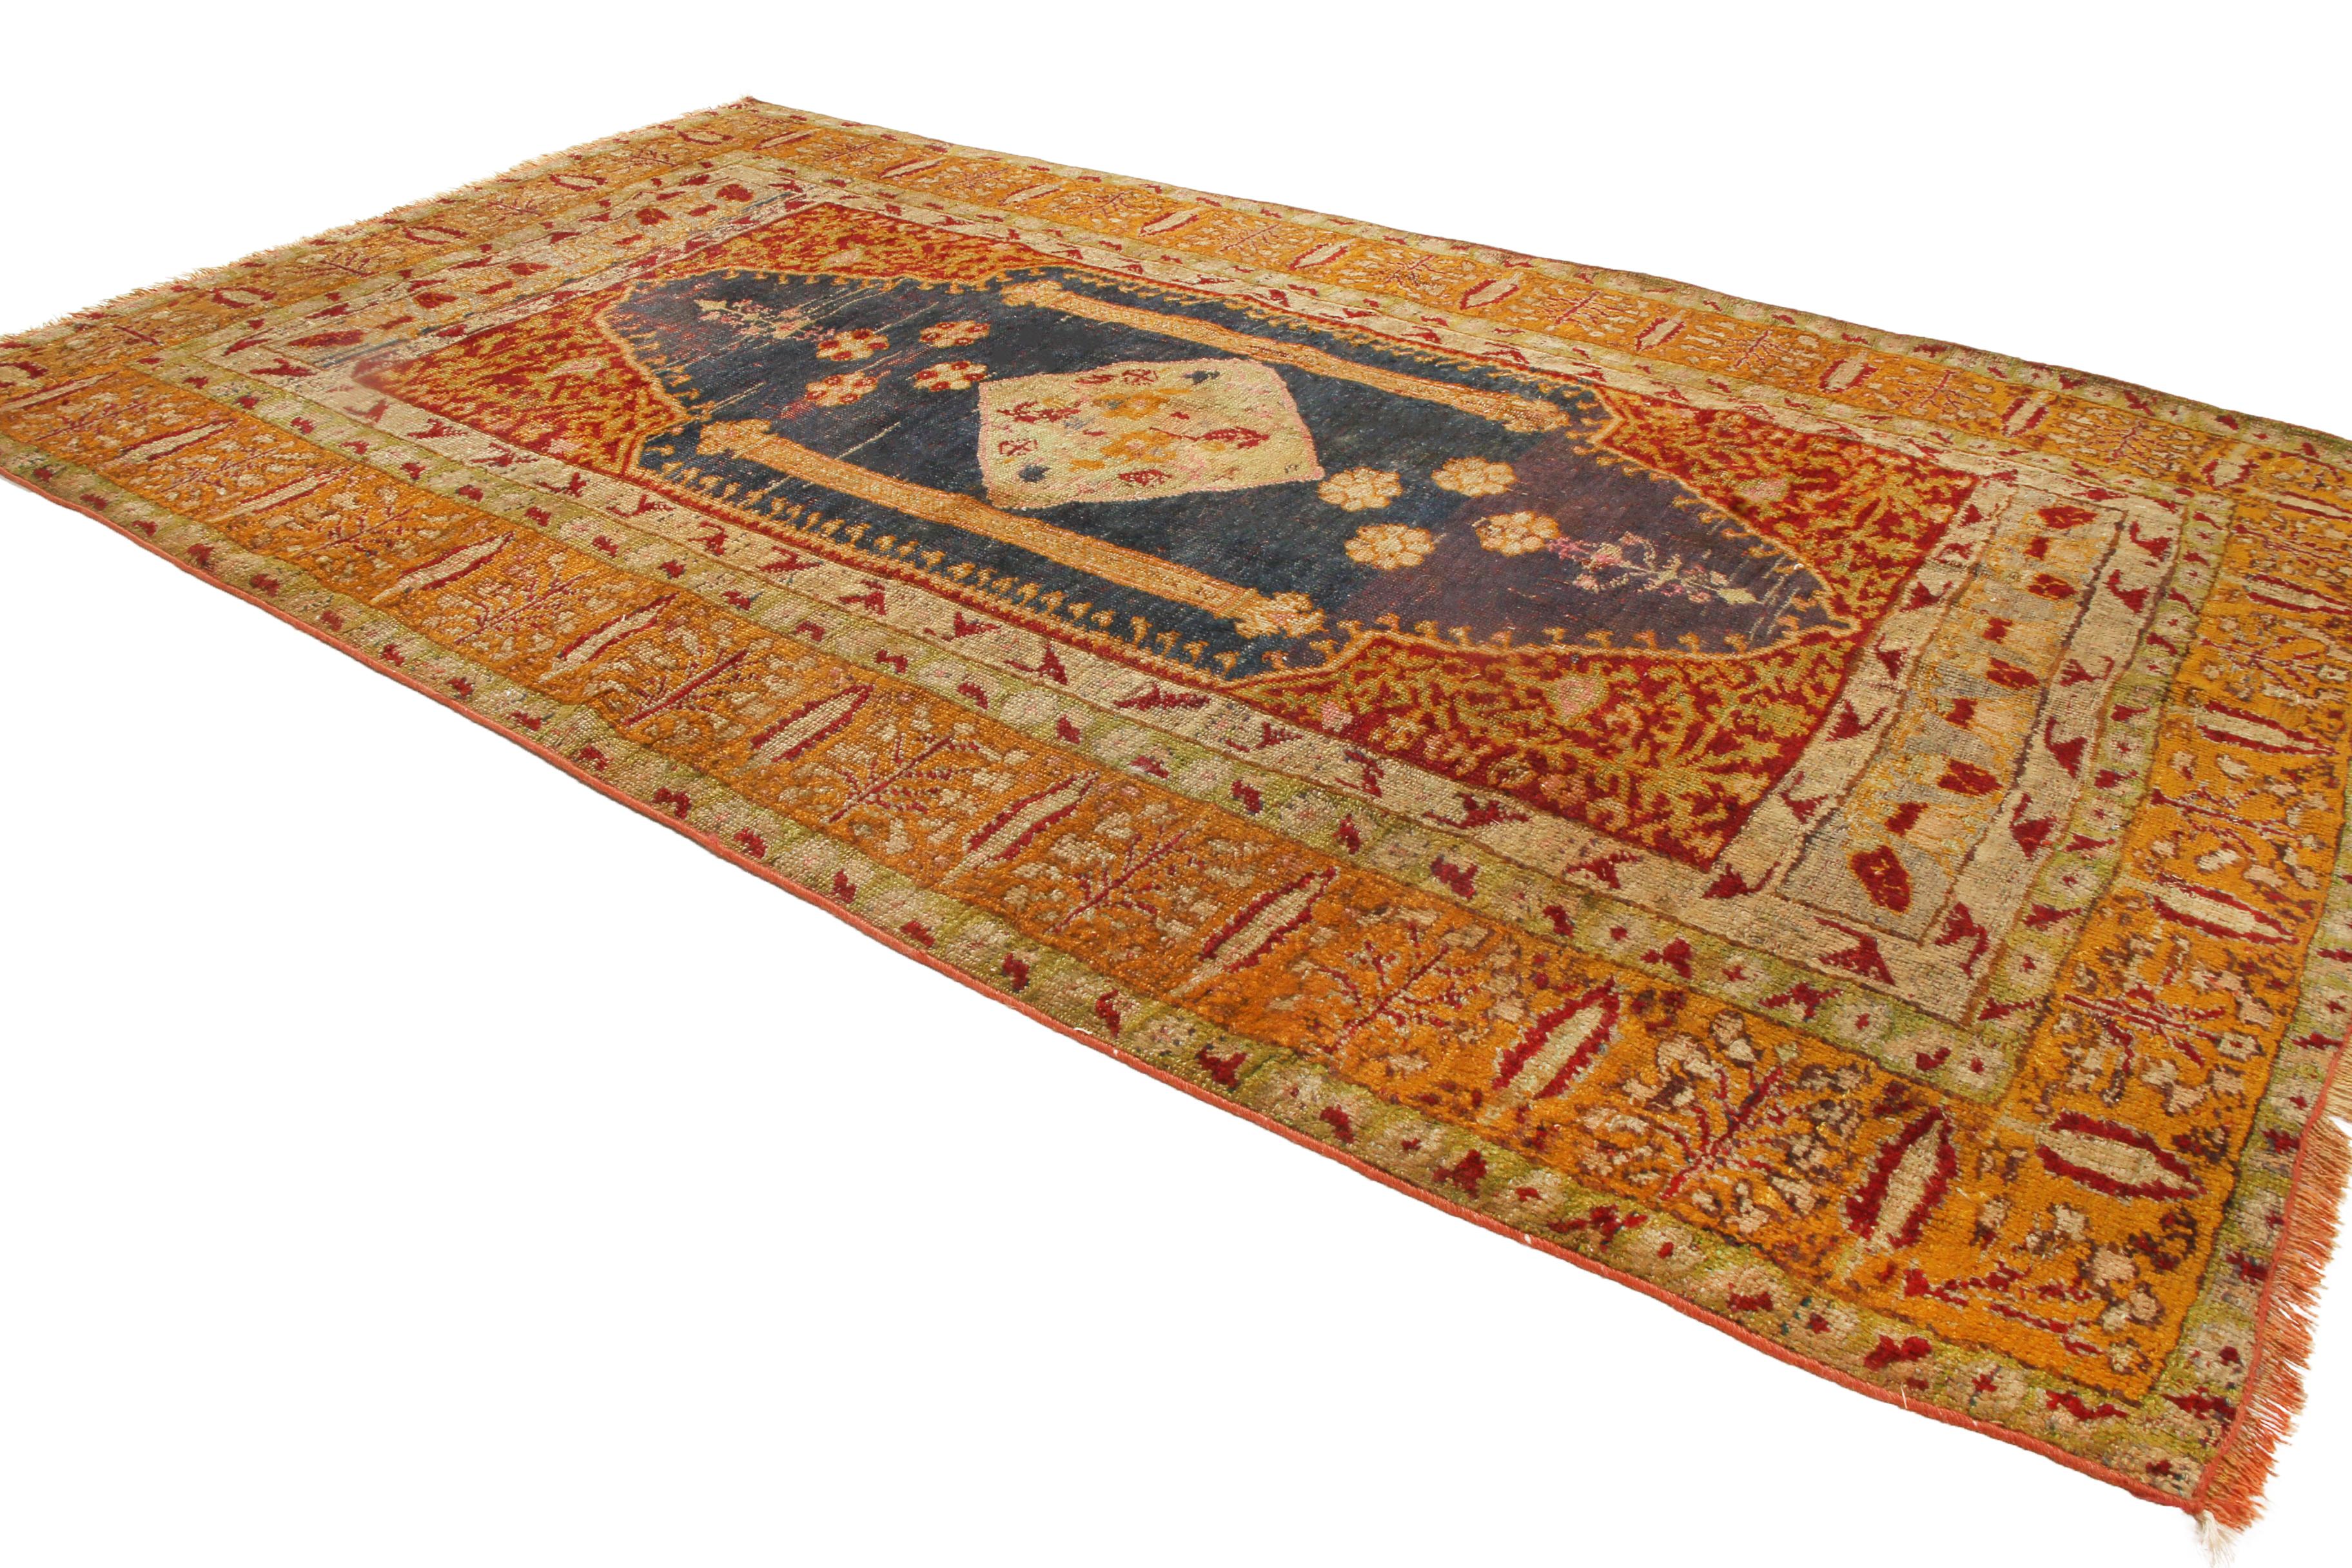 Turkish Antique Oushak Traditional Orange-Gold and Red Wool Rug